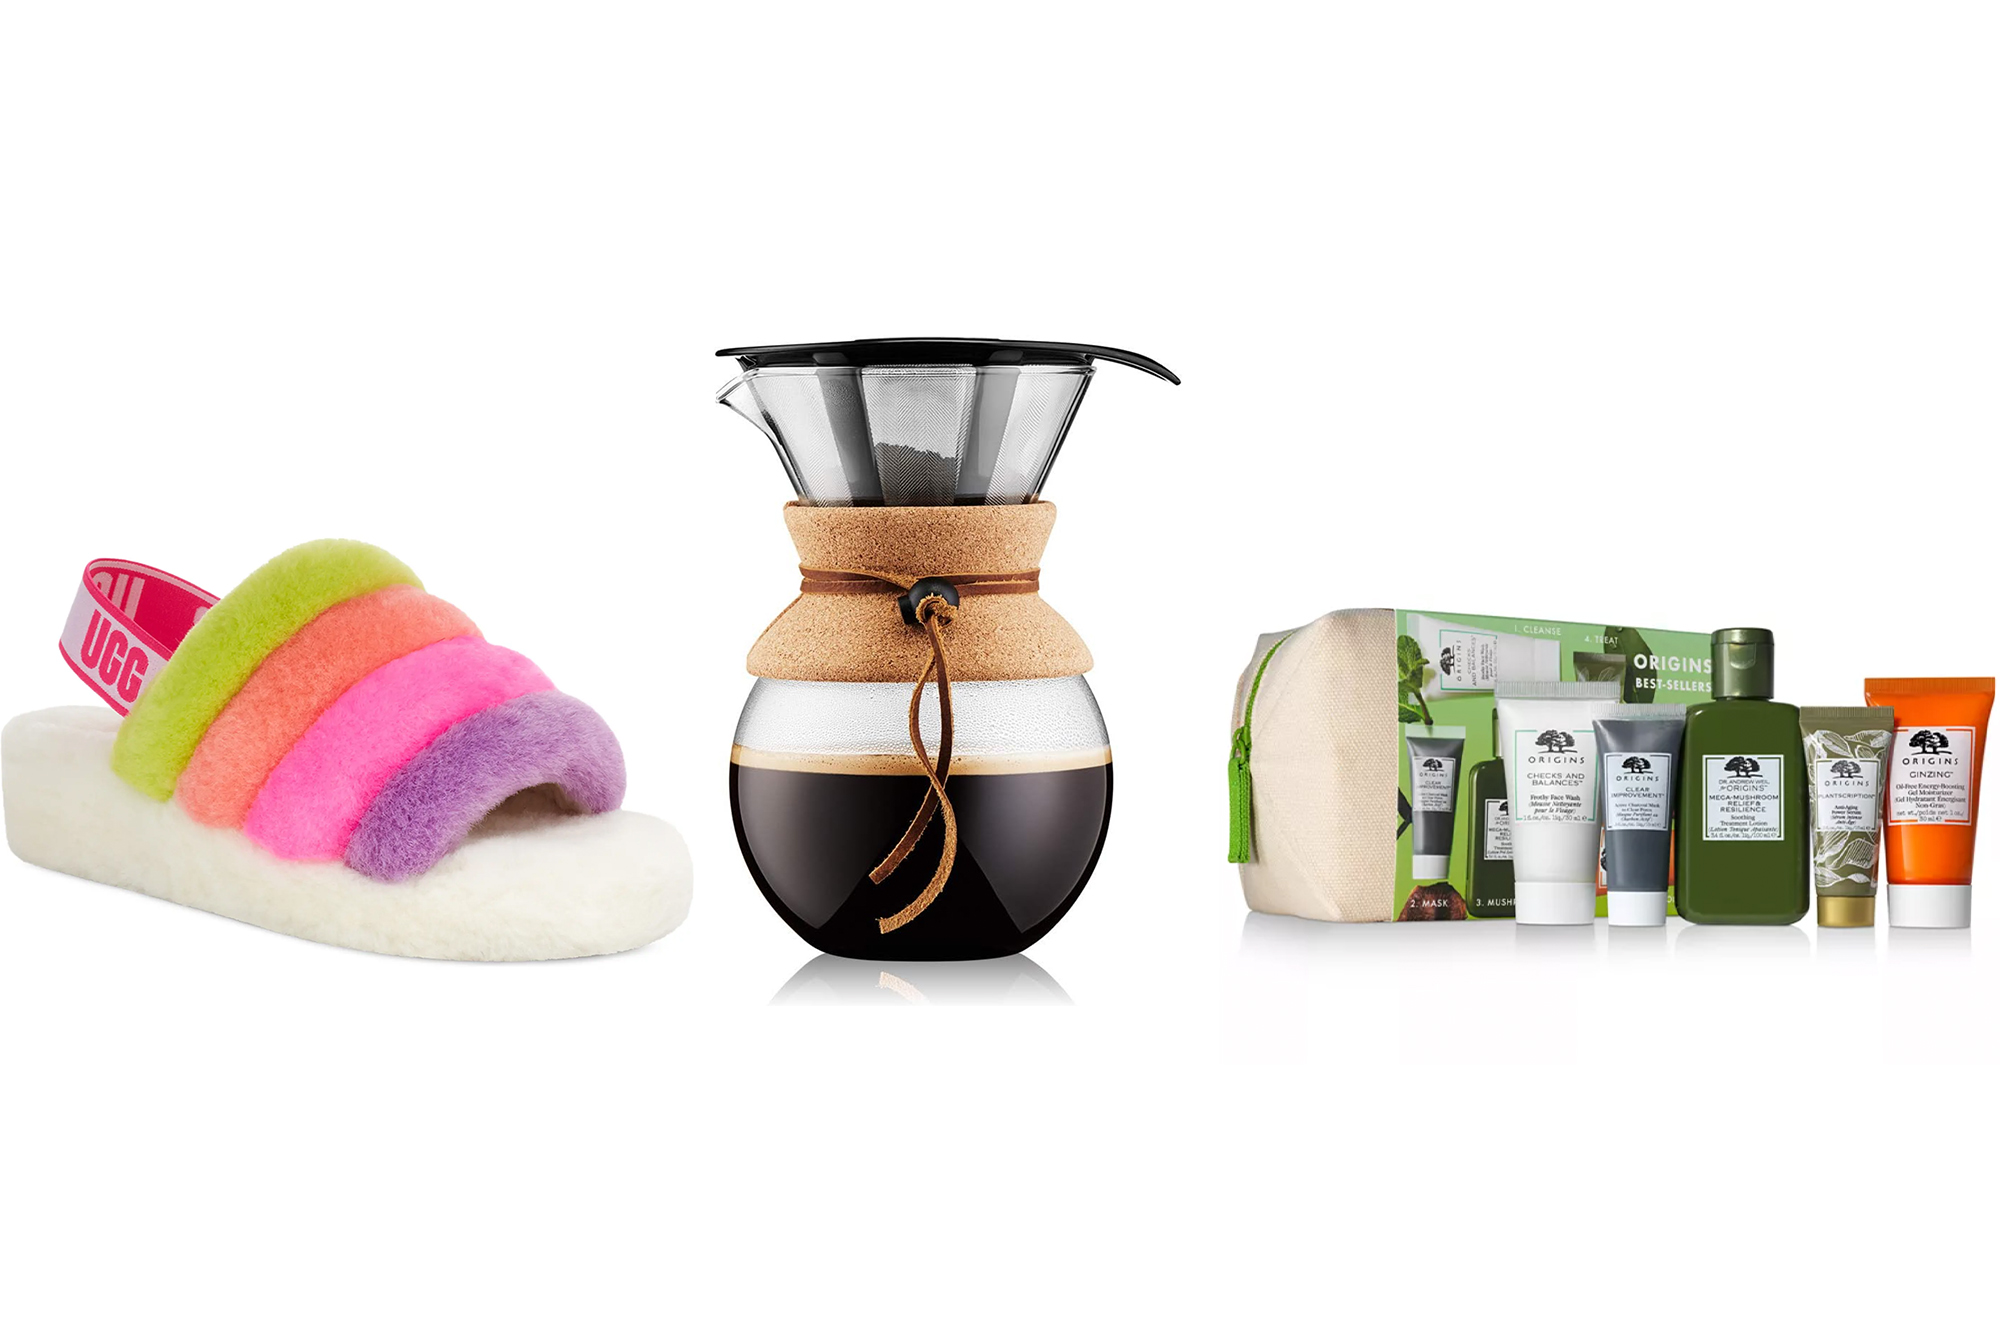 The Best Gifts Under $40